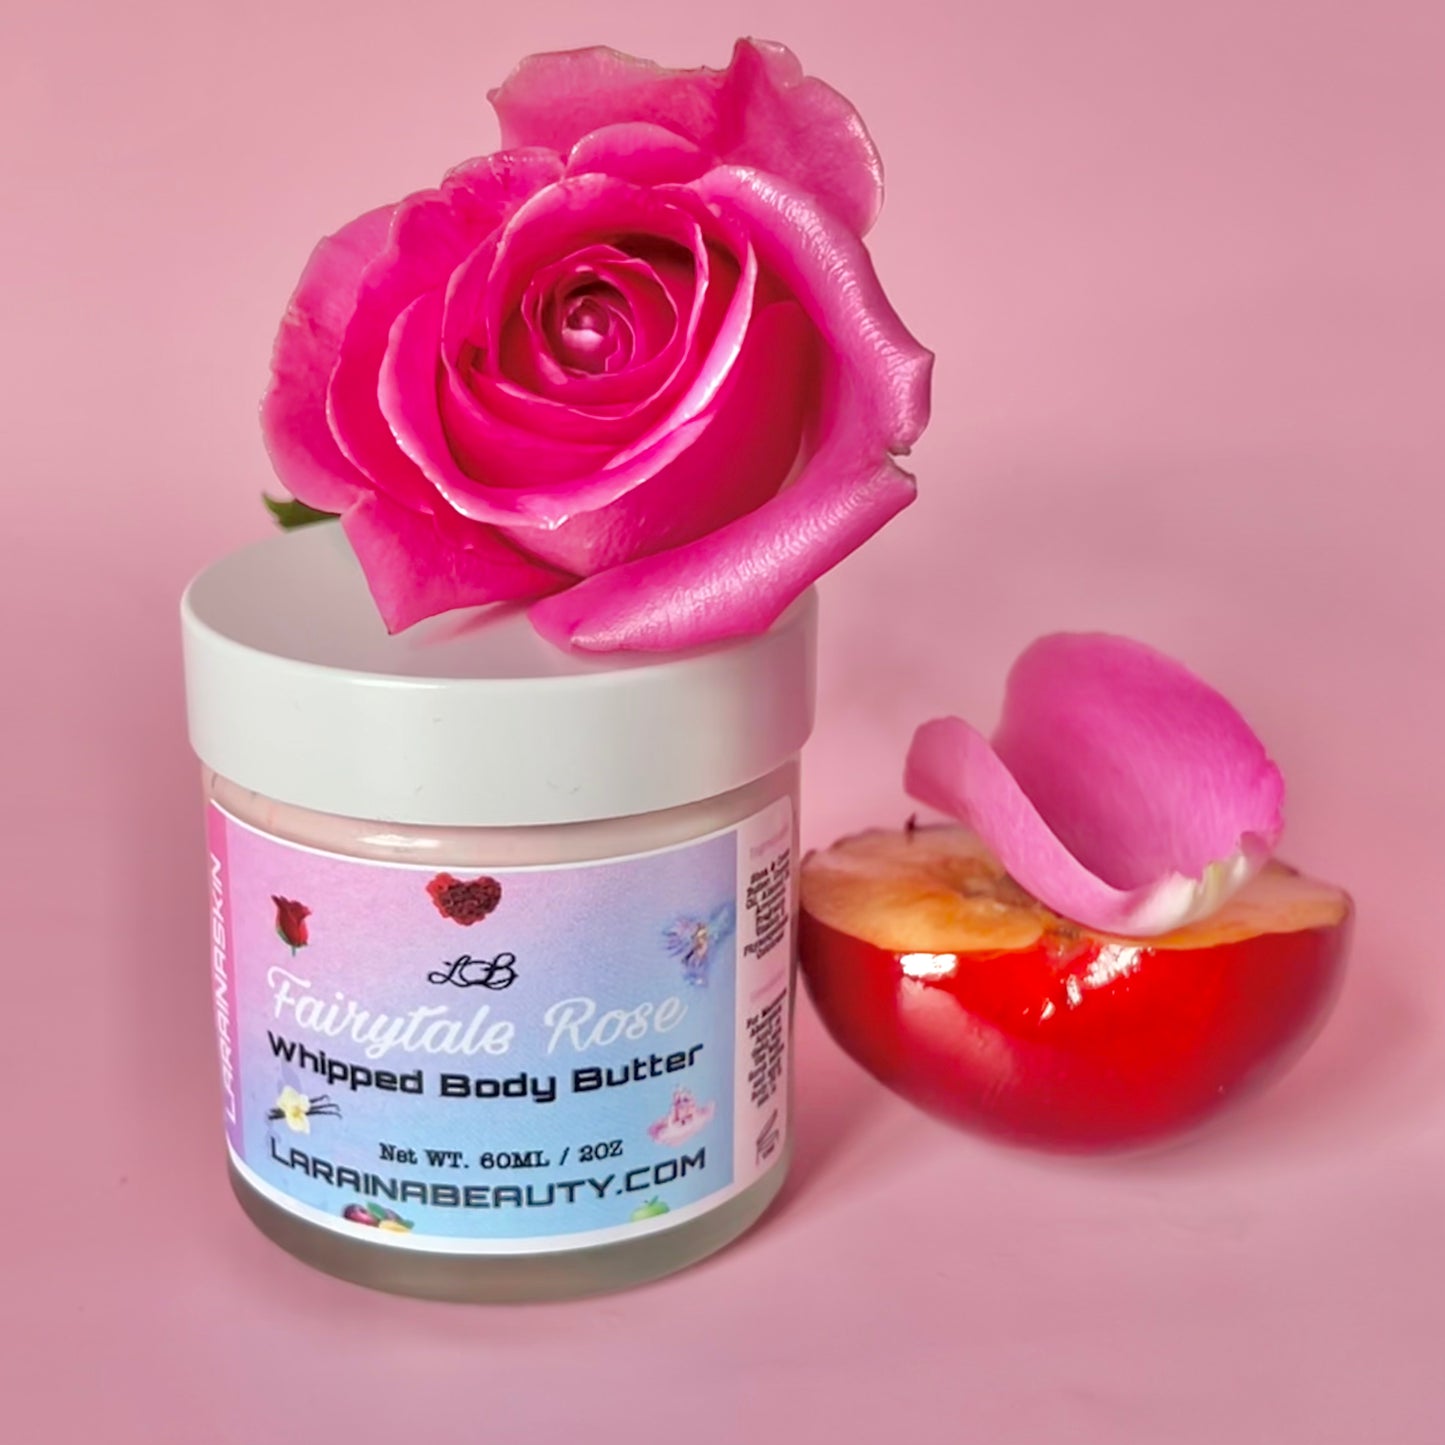 Fairytale rose is a floral scented soft and sensual body butter cream with the most and best moisturising benefits to dry skin. the best uk body cream that leaves the skin glowing, packed with vitamin e, 99% natural ingredients and alcohol free. 